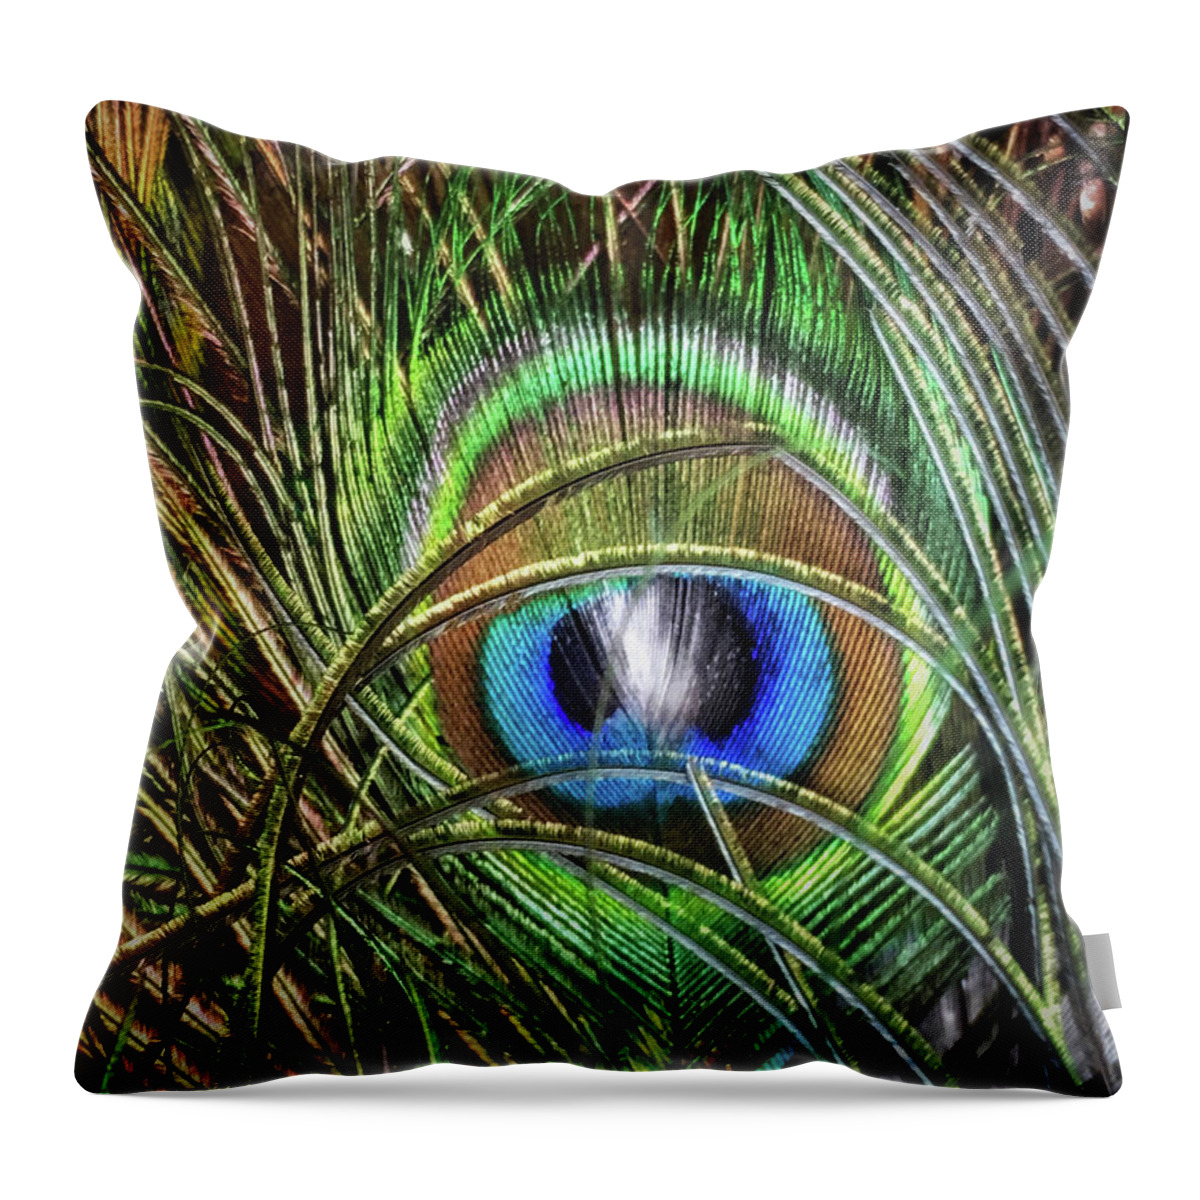 Peacock Throw Pillow featuring the photograph I'm Watching You by Doris Aguirre